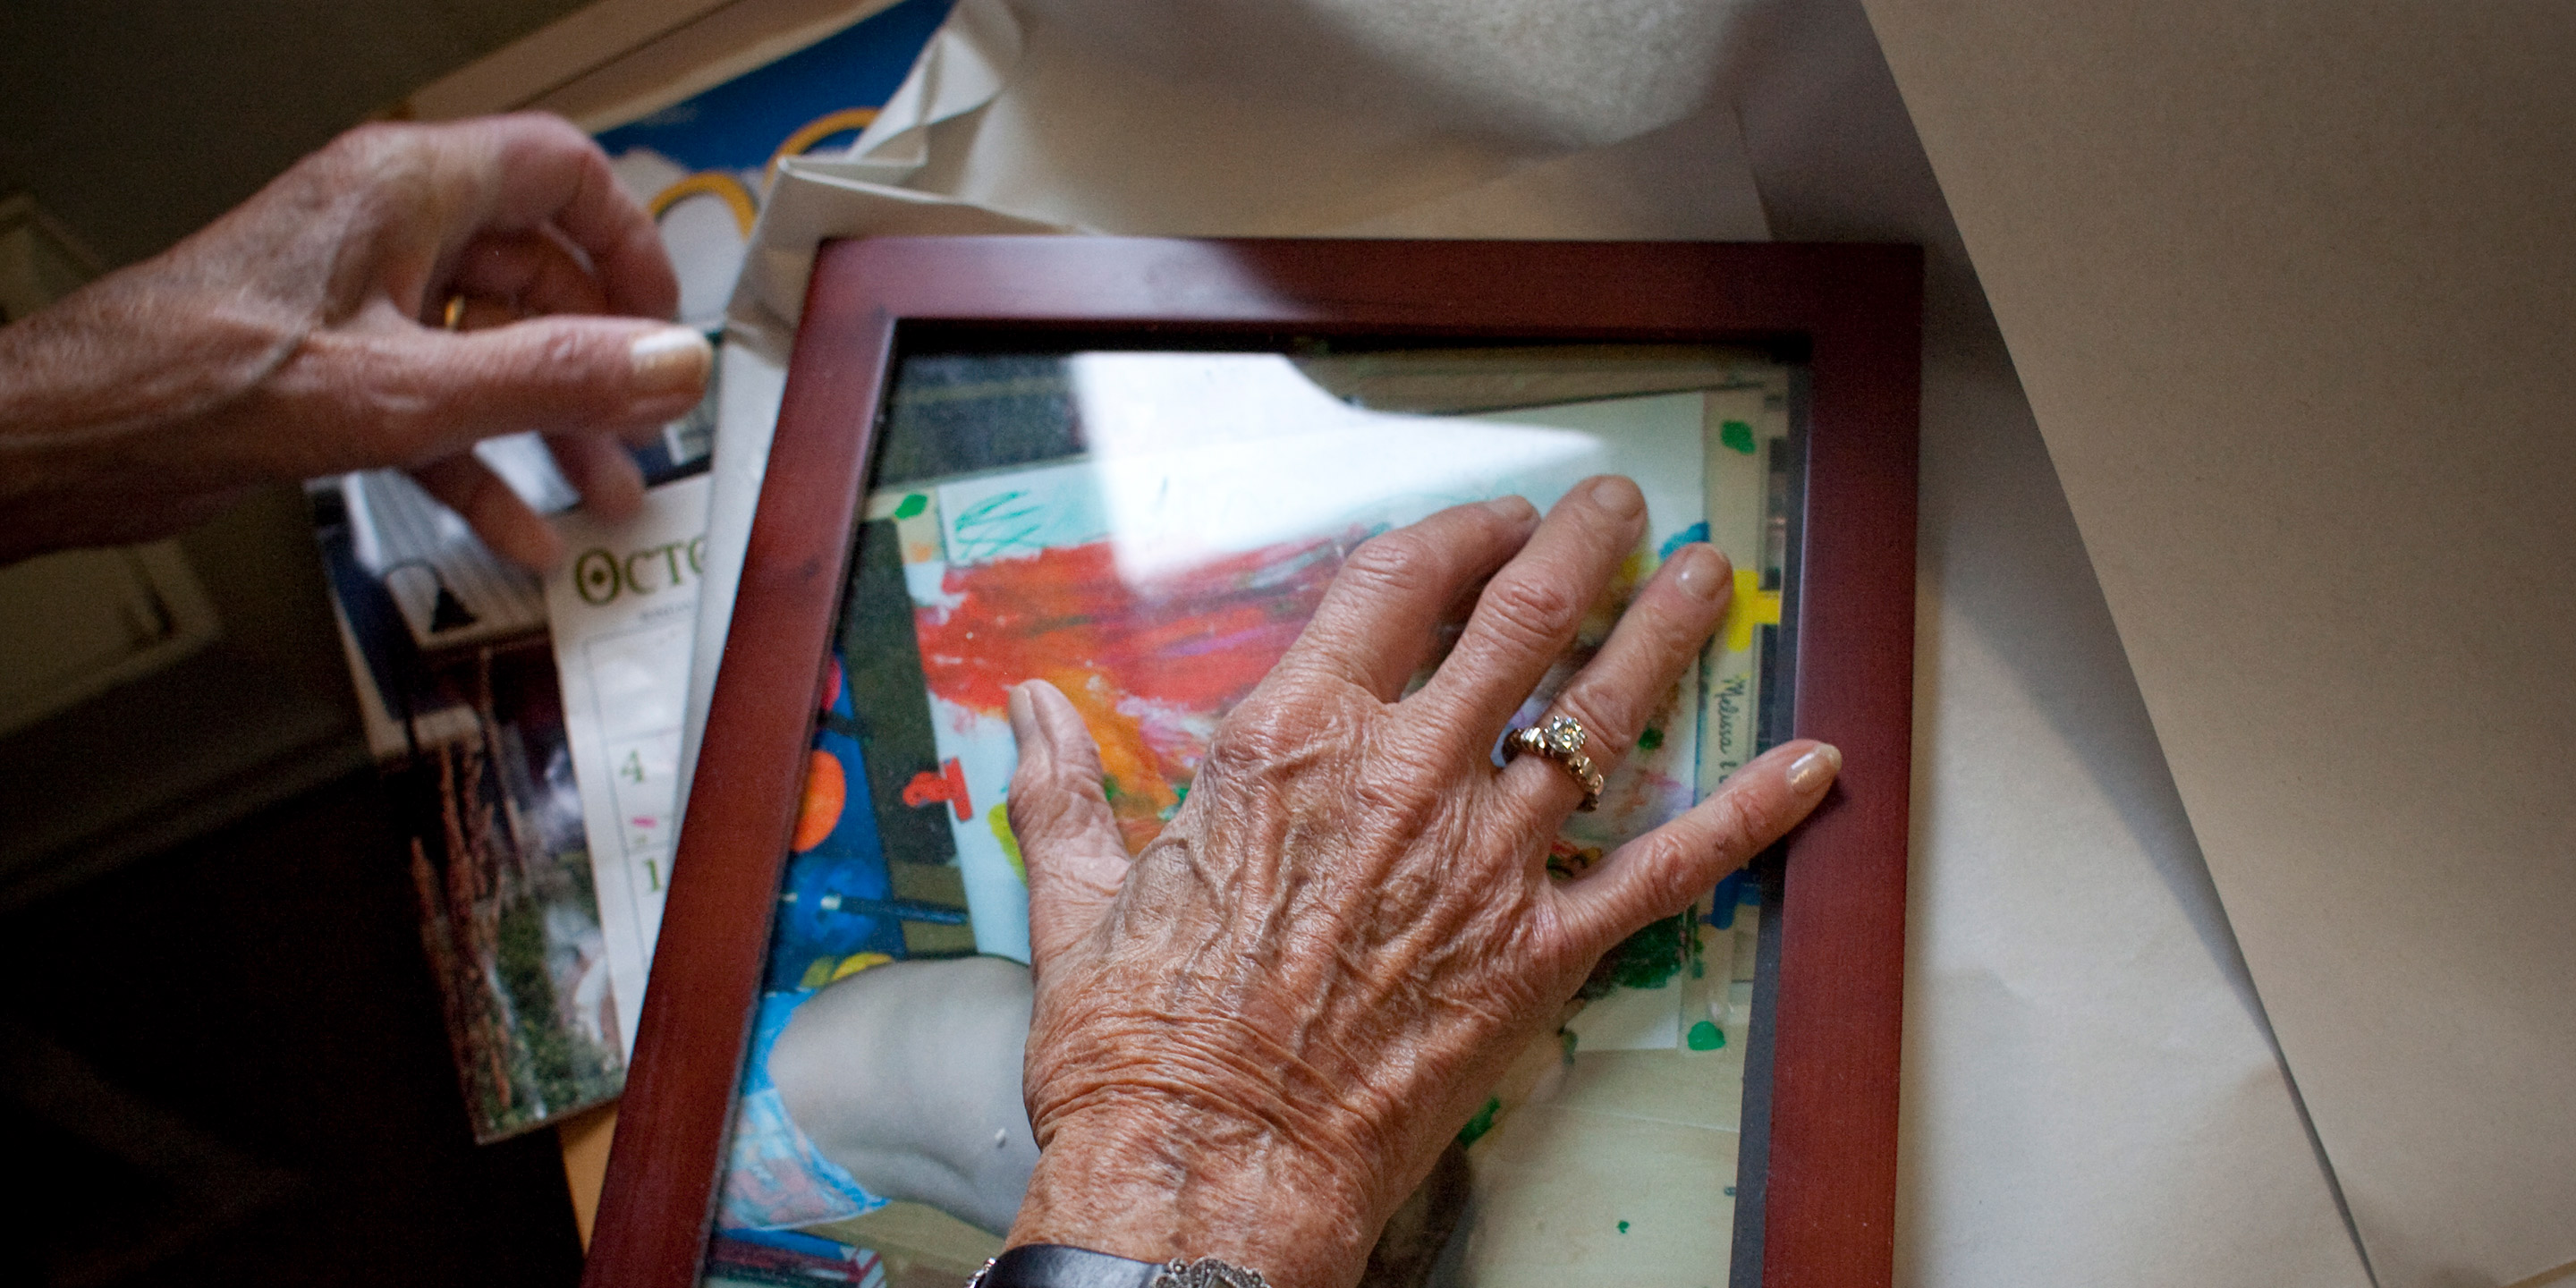 A woman wearing a ring places her hand over a picture frame 